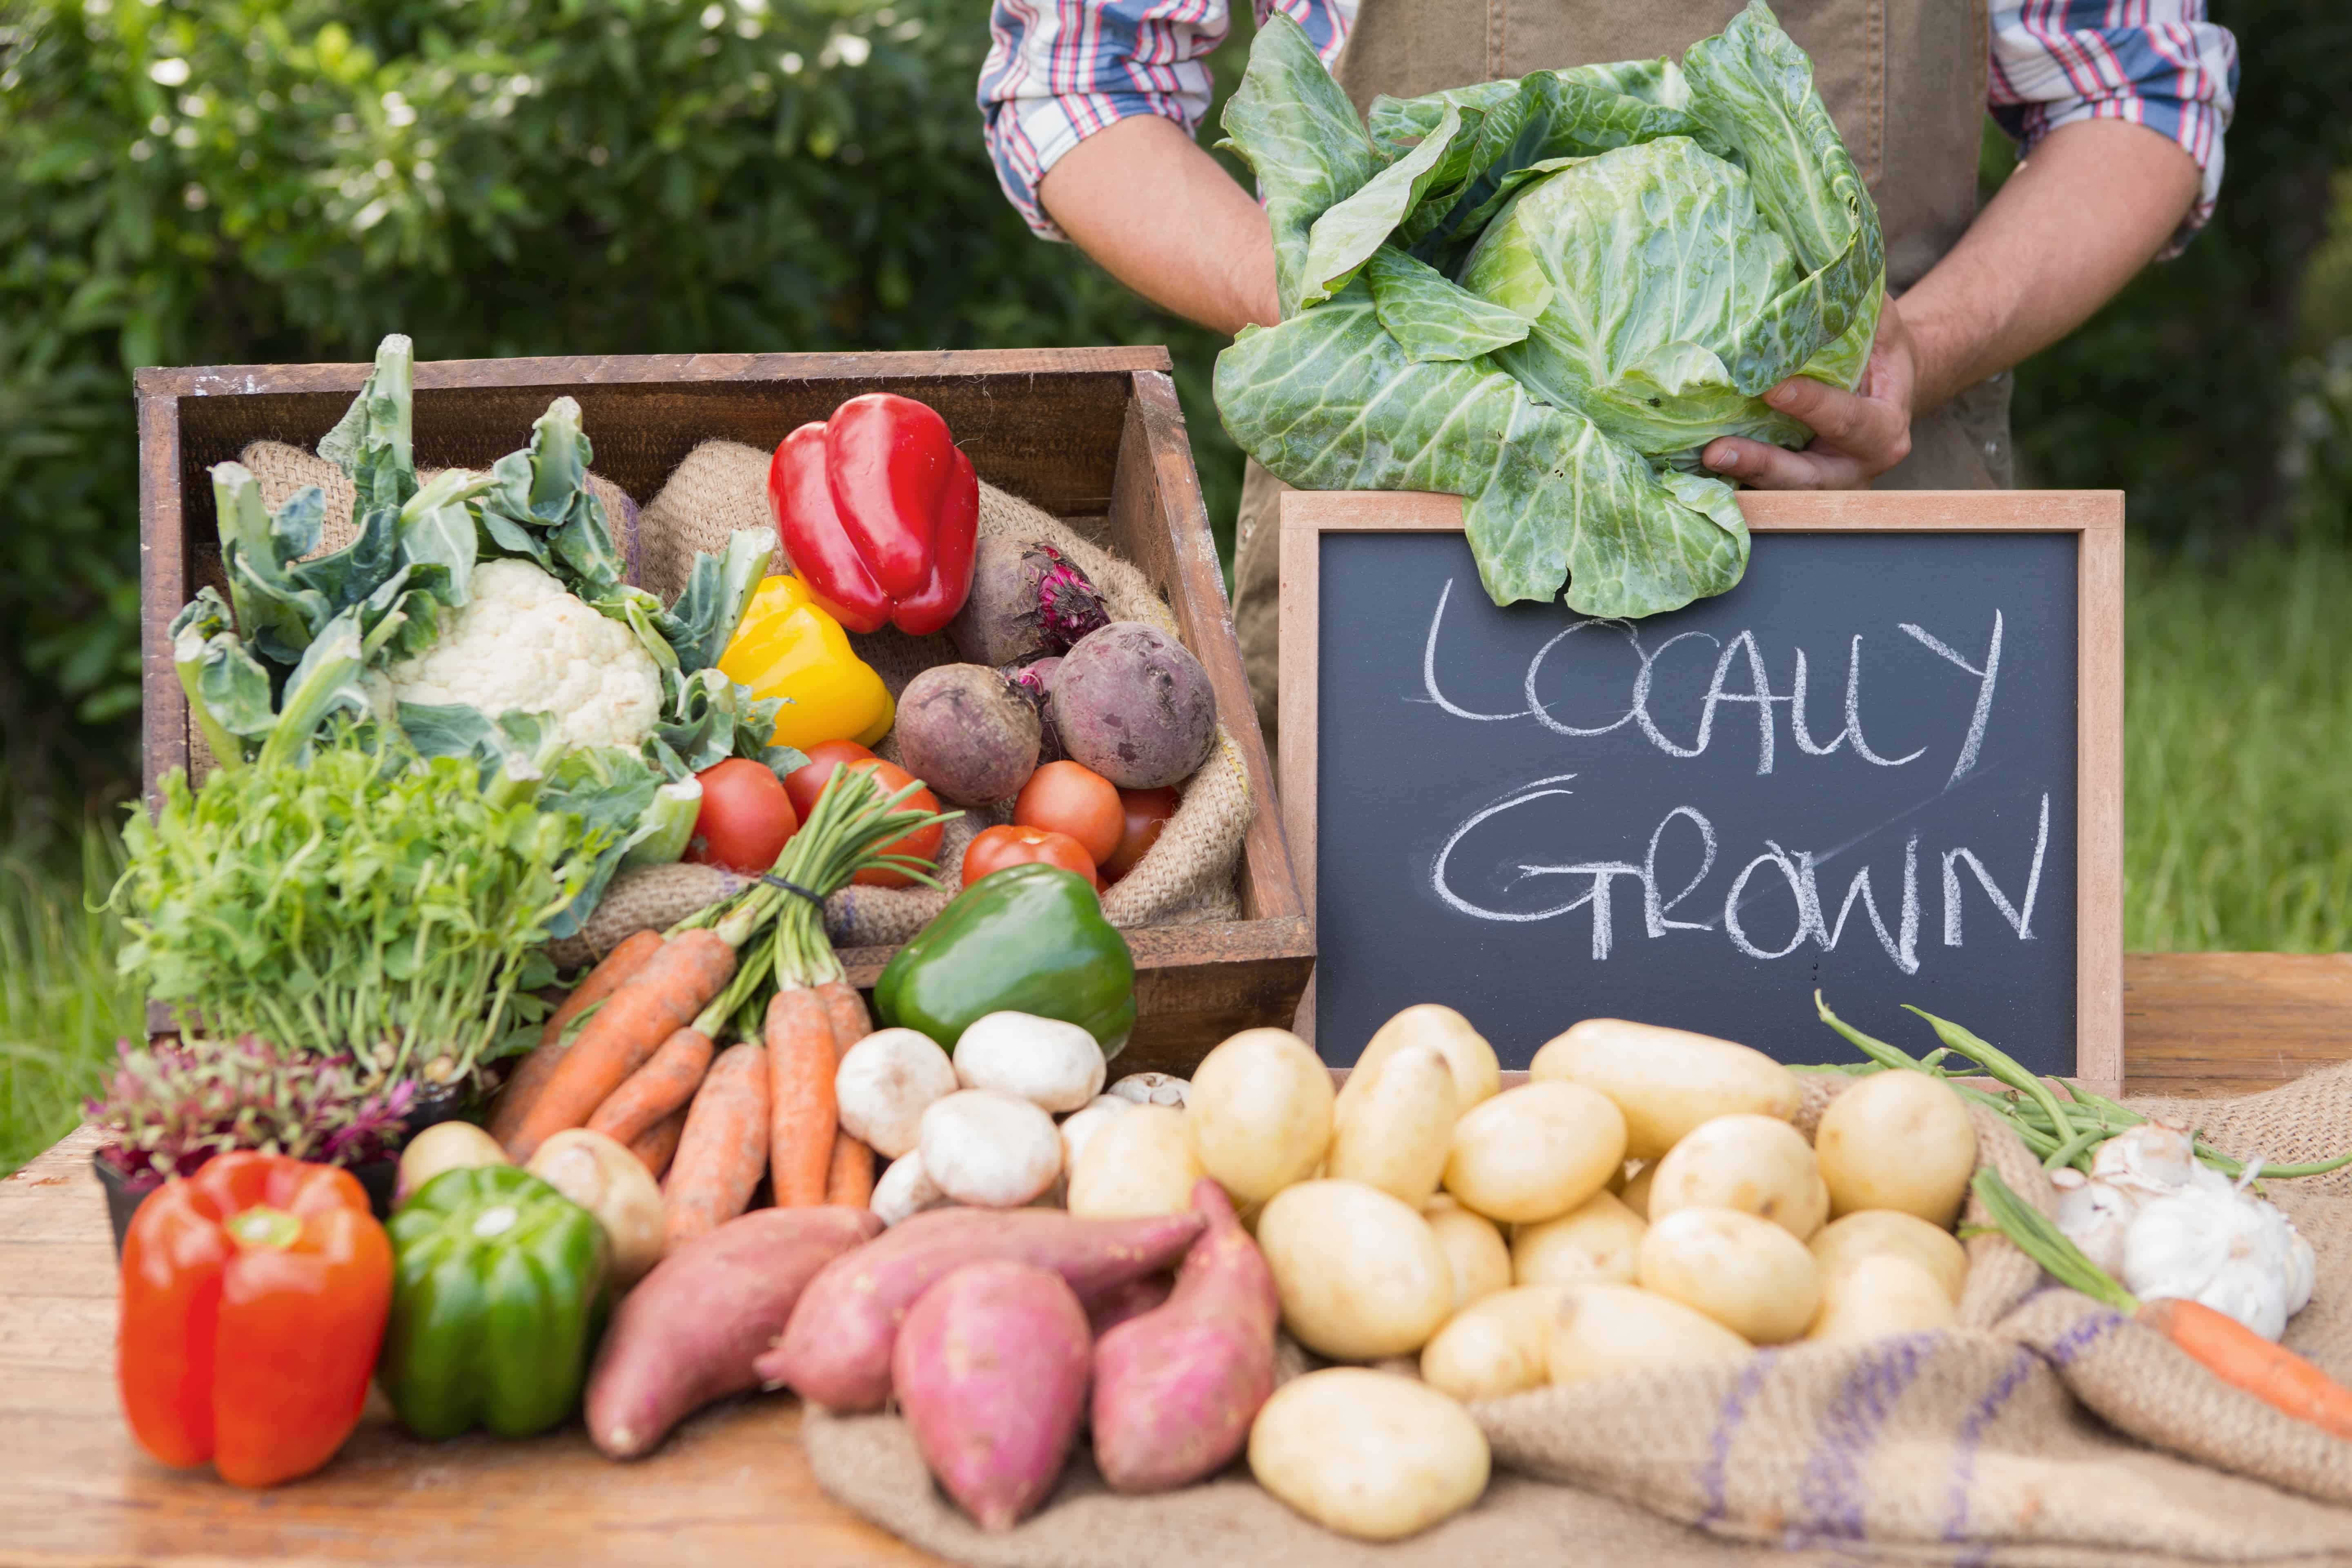 If you are unable to grow a garden or just want to supplement your own produce with more fresh foods, a farmers’ market is a great place to go. Children can learn about local foods, what grows in the area and what is absent.